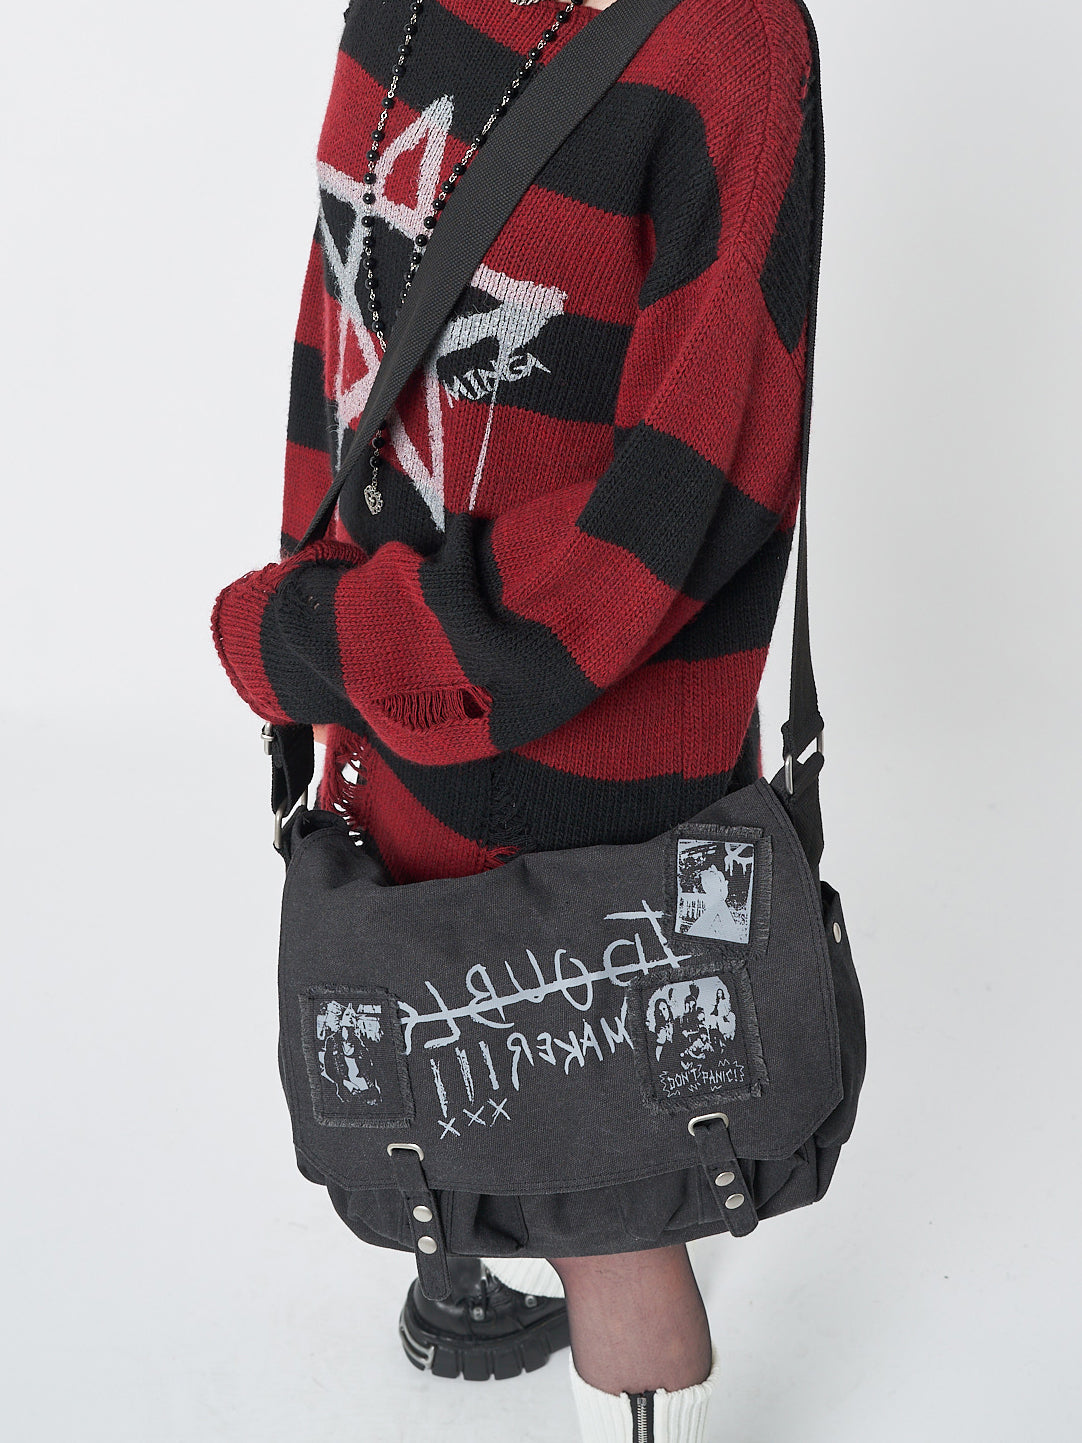 Black Washed Canvas Messenger Bag with Pink Patches and Prints - Grunge